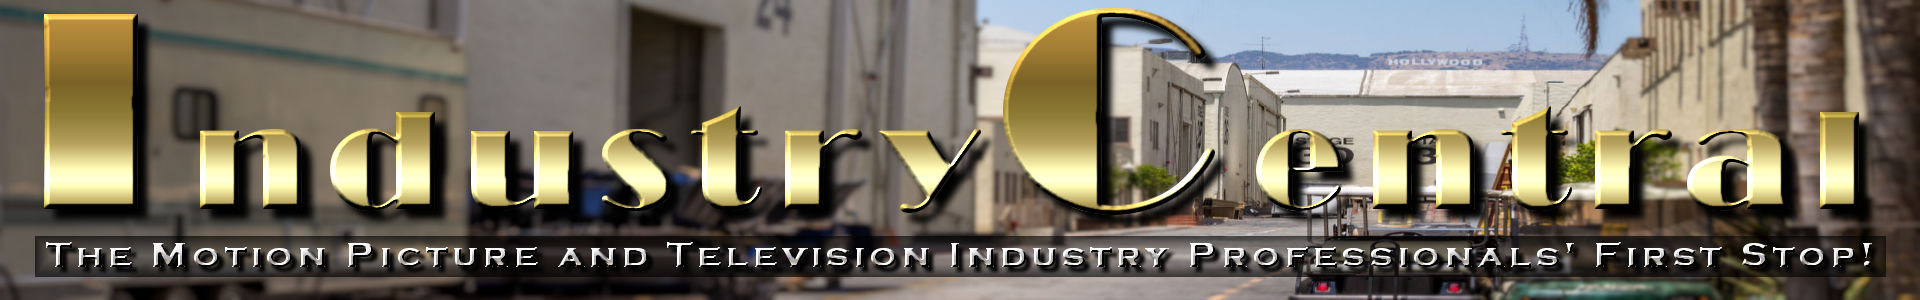 IndustryCentral -The Motion Picture & Television Industry Professionals' First Stop!